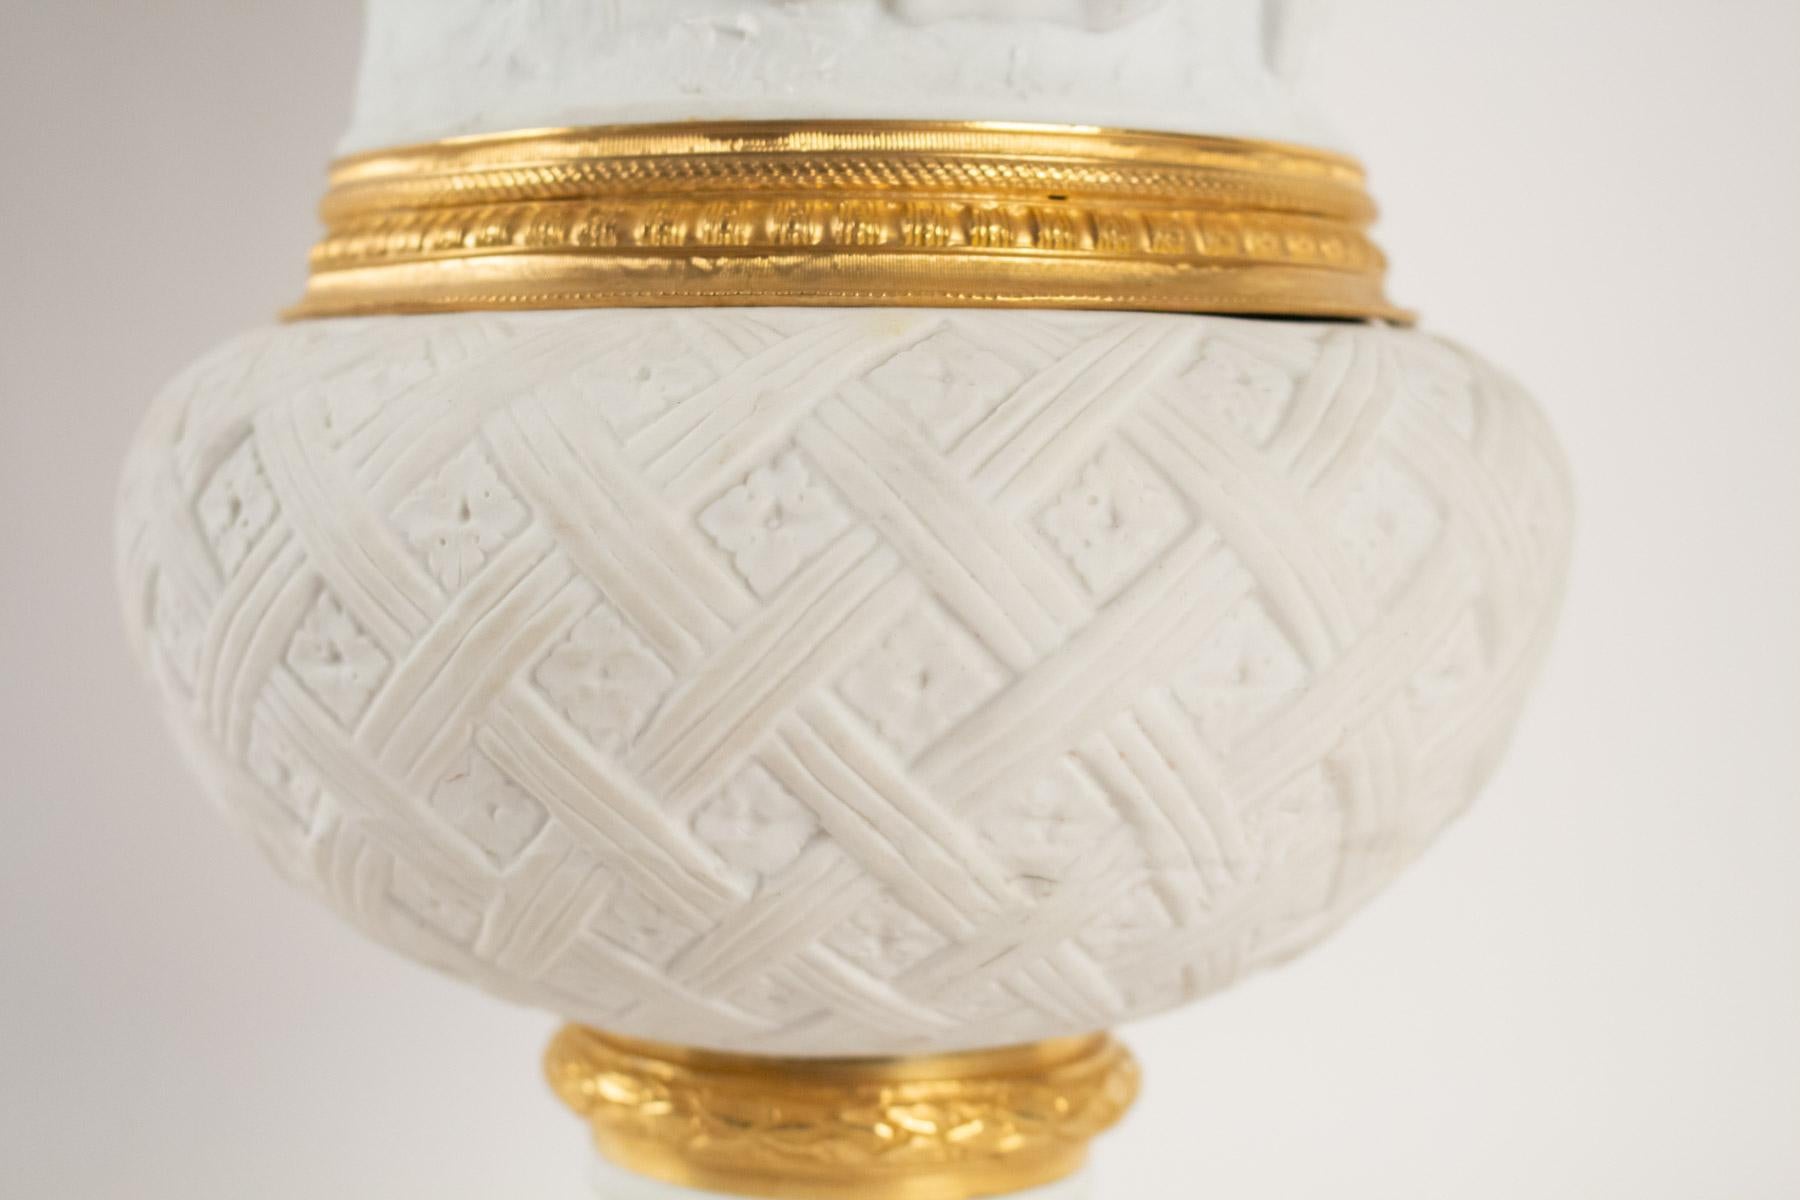 Medici vase in biscuit and gilt bronze, early 20th century Louis XVI style
Measures: H 39cm, D 23cm.